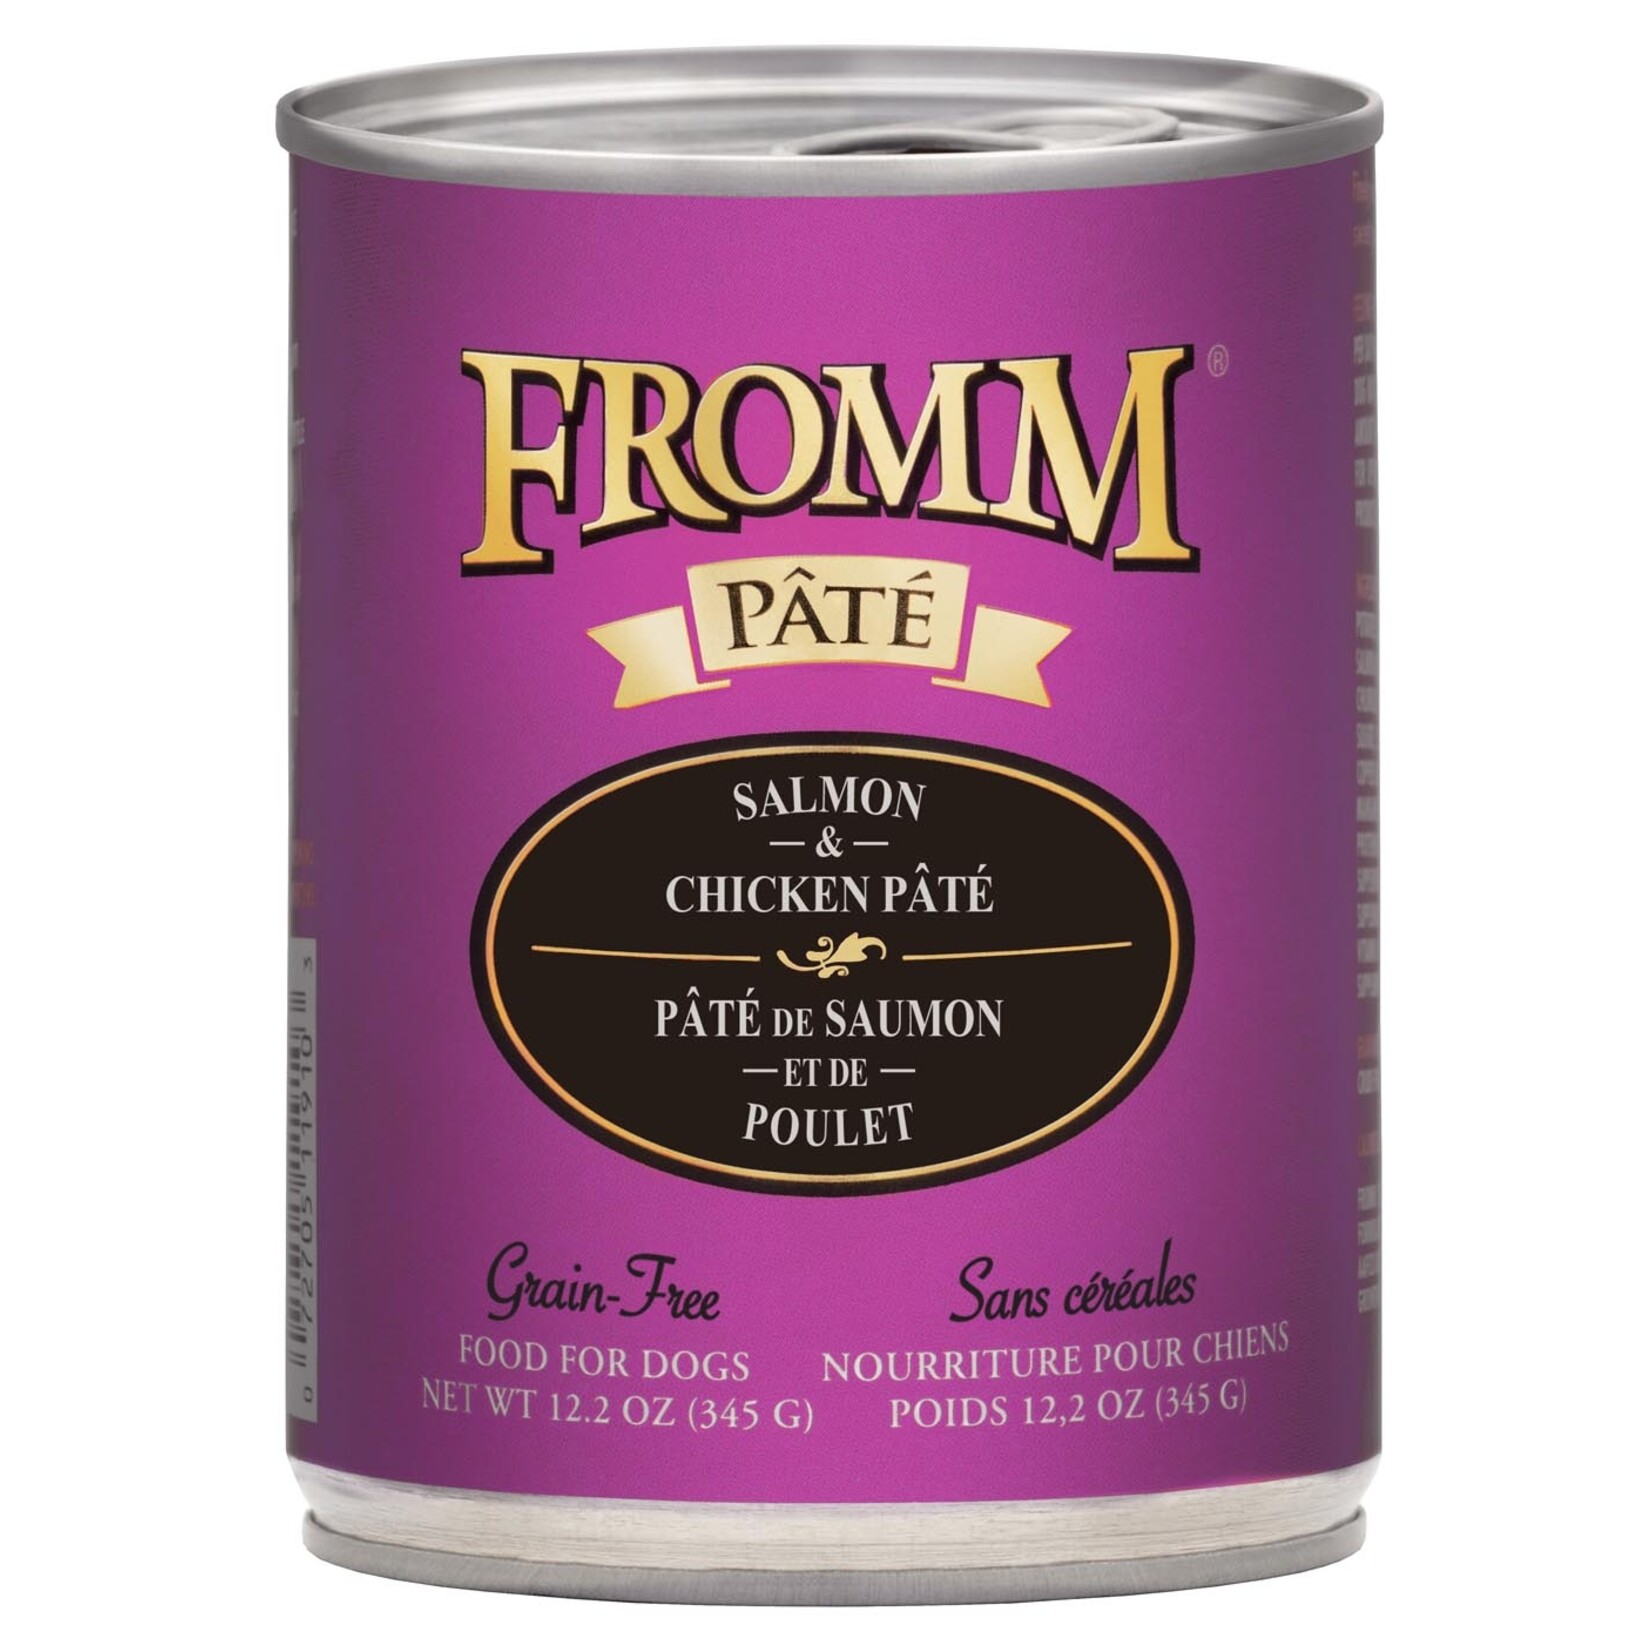 Fromm Salmon and Chicken Pâté Grain Free Wet Dog Food, 12.2oz Can